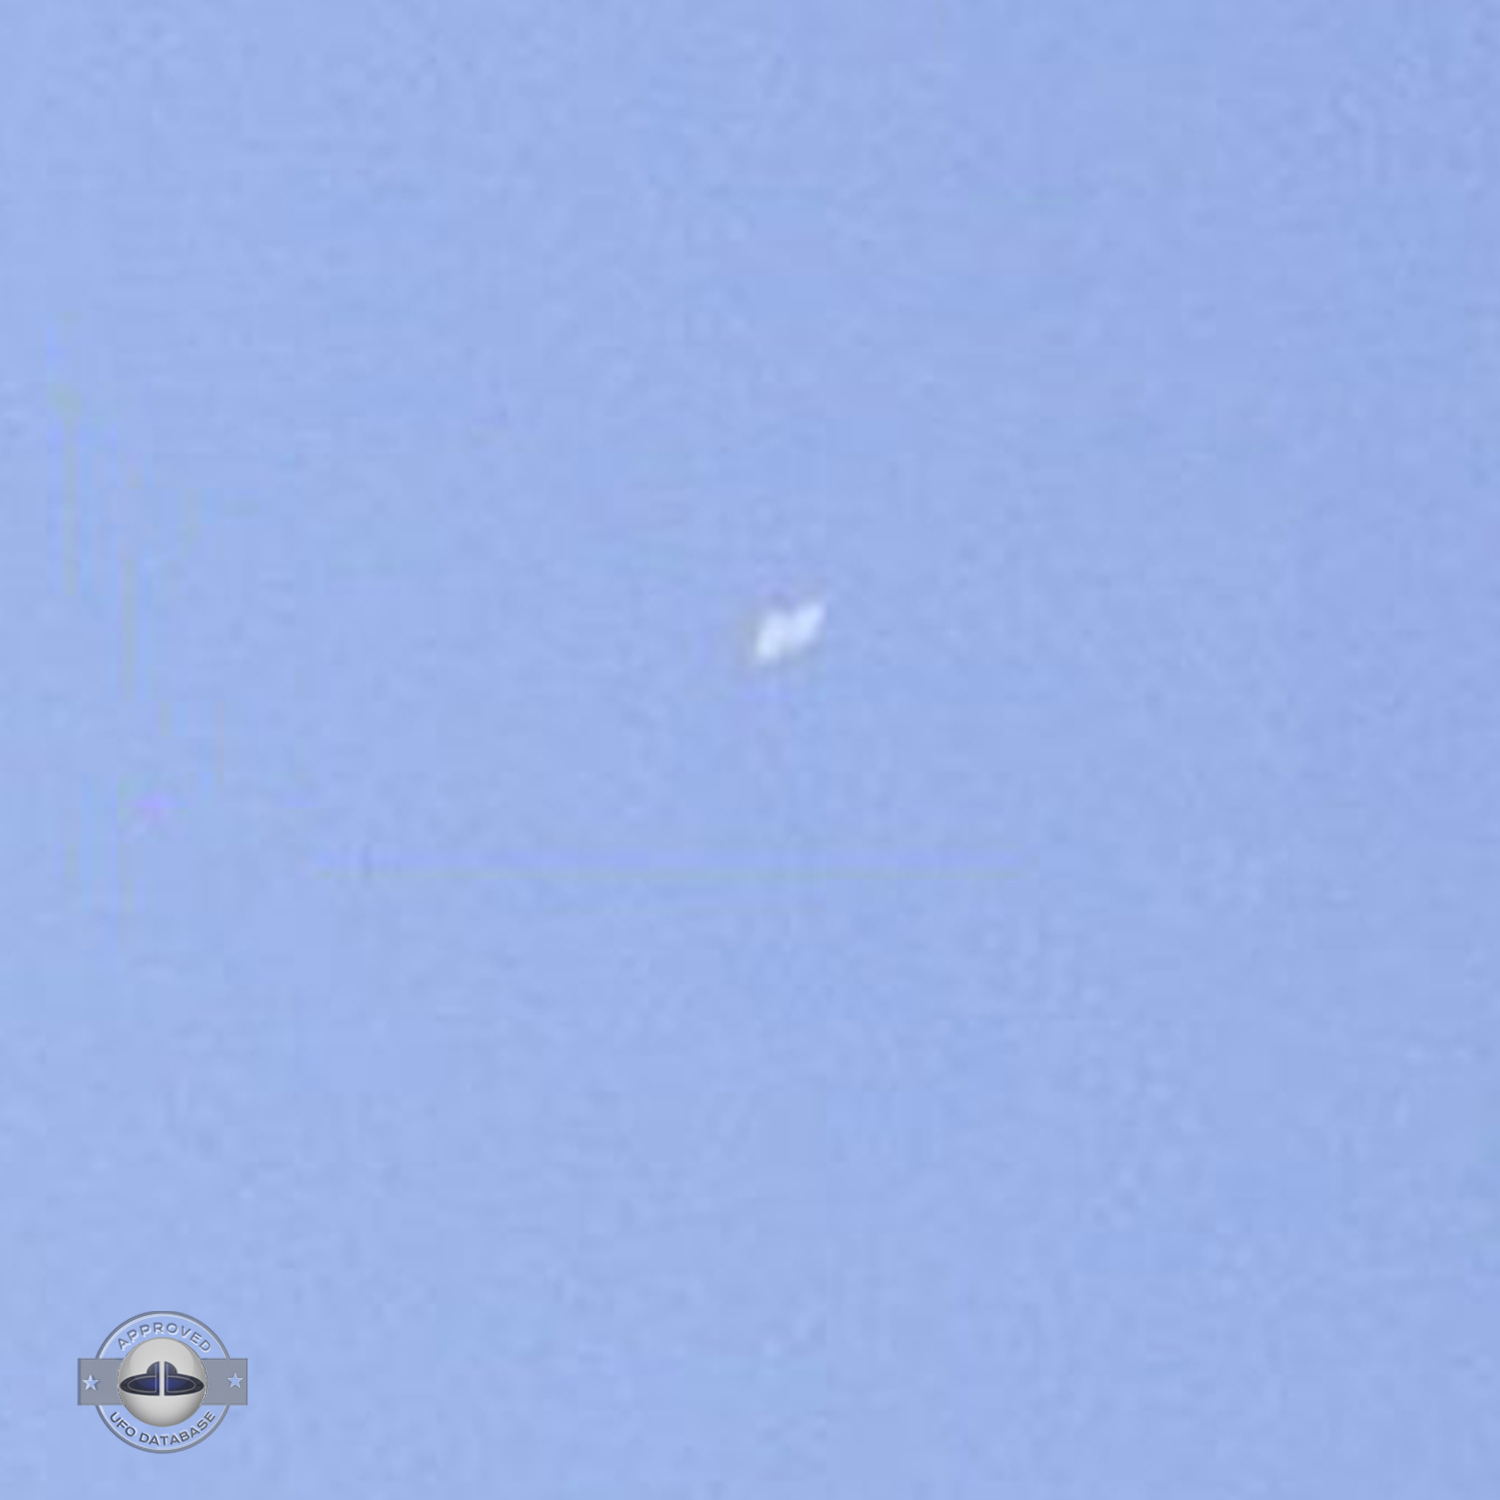 UFO in a blue sky near the pont des demoiselles in Toulouse UFO Picture #11-3